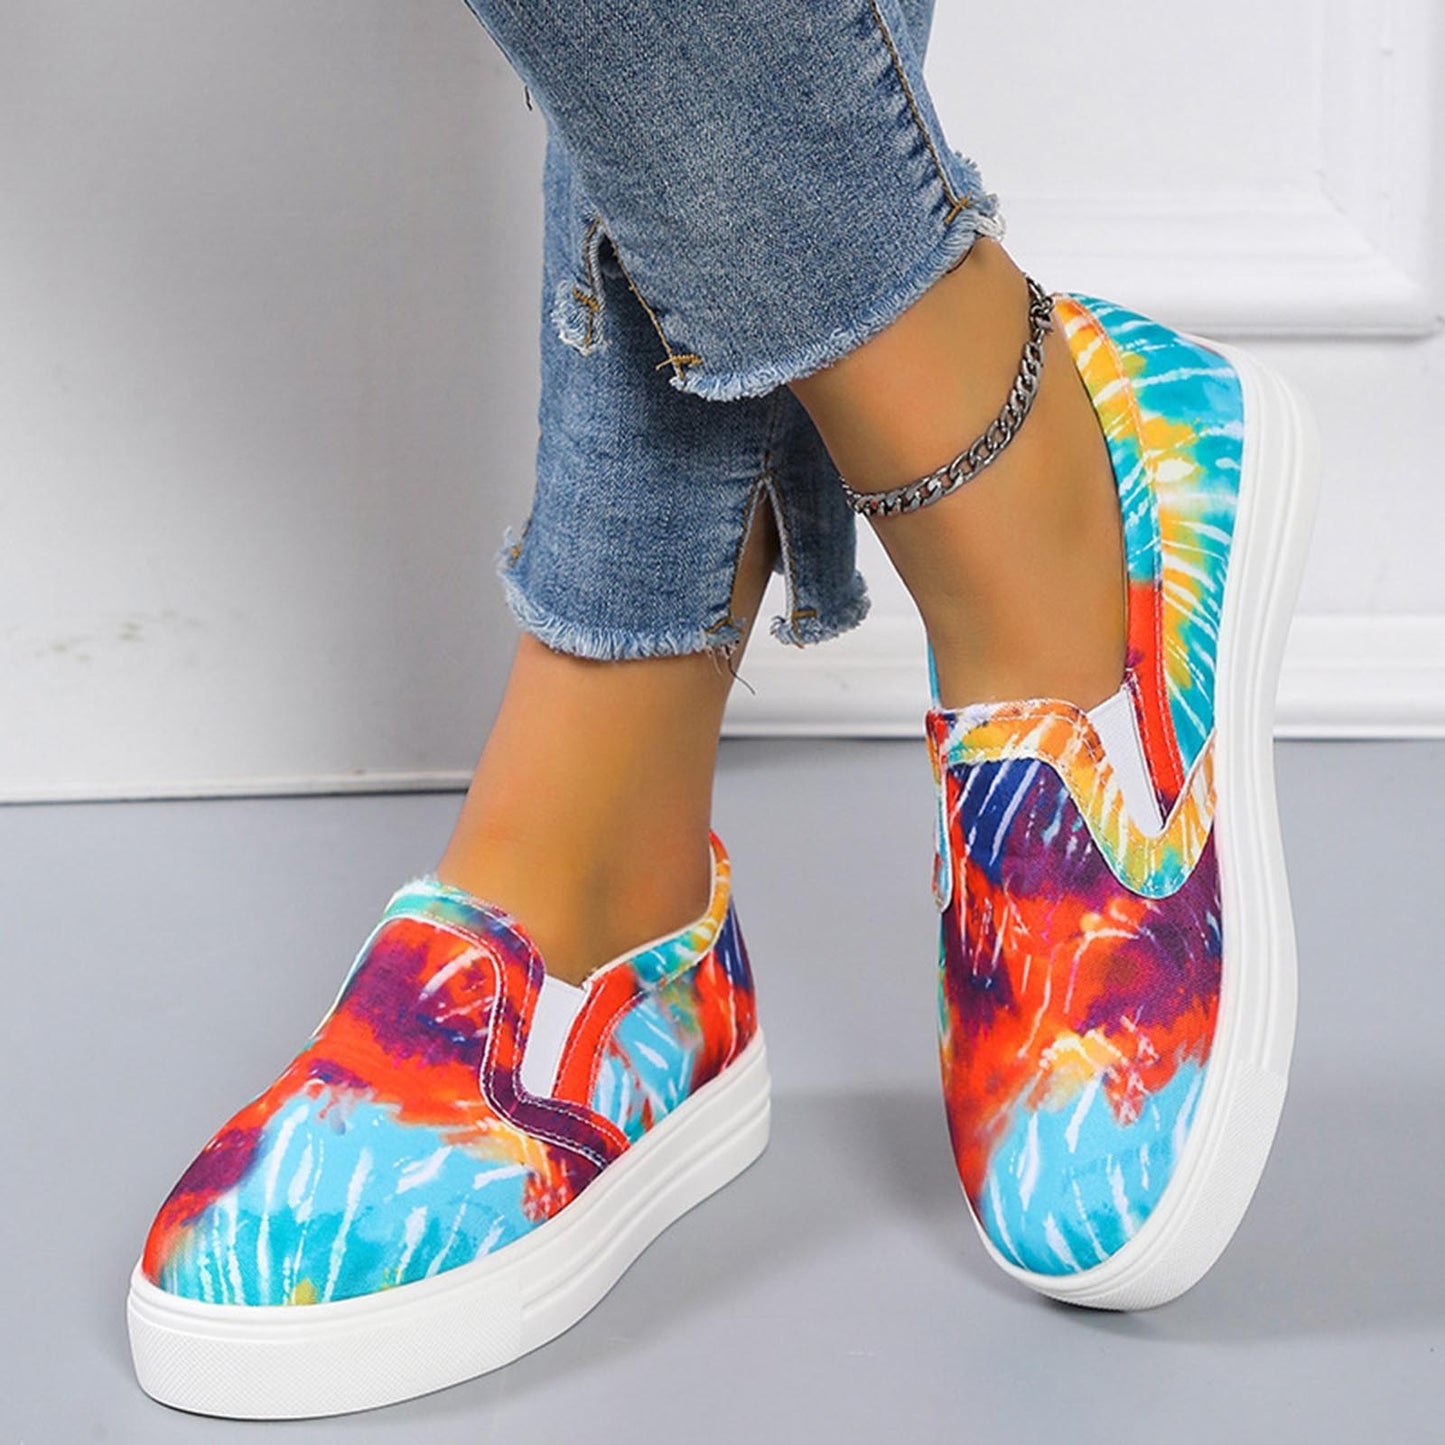 Summer Sneakers Sport Shoes For Women Canvas Shoes/Flat Graffiti Print Shoes Female